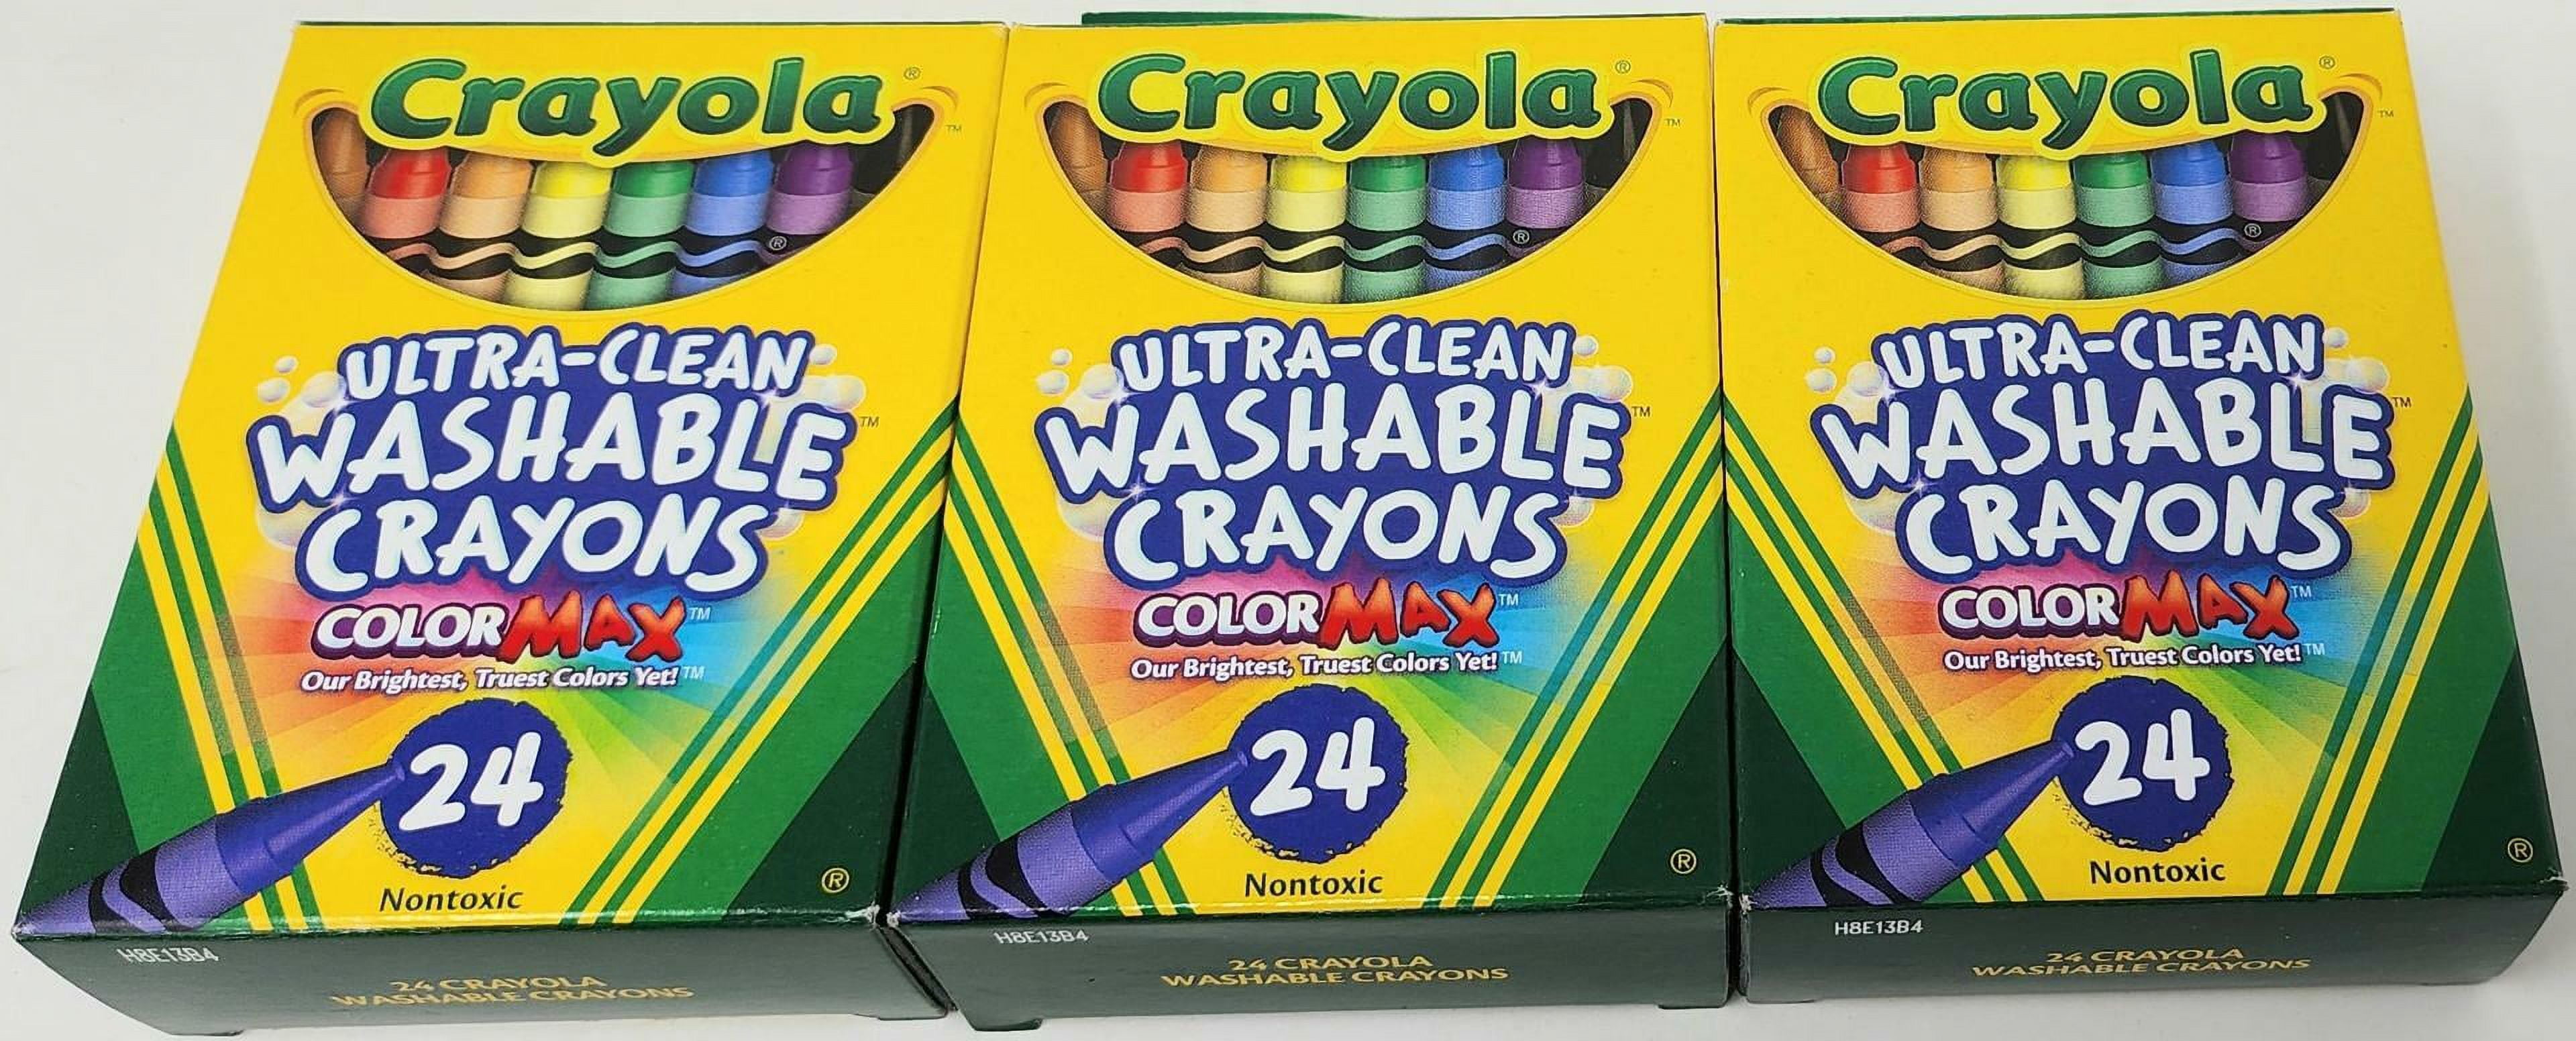 Crayola® Ultra-Clean Washable Crayons - 24 Pack